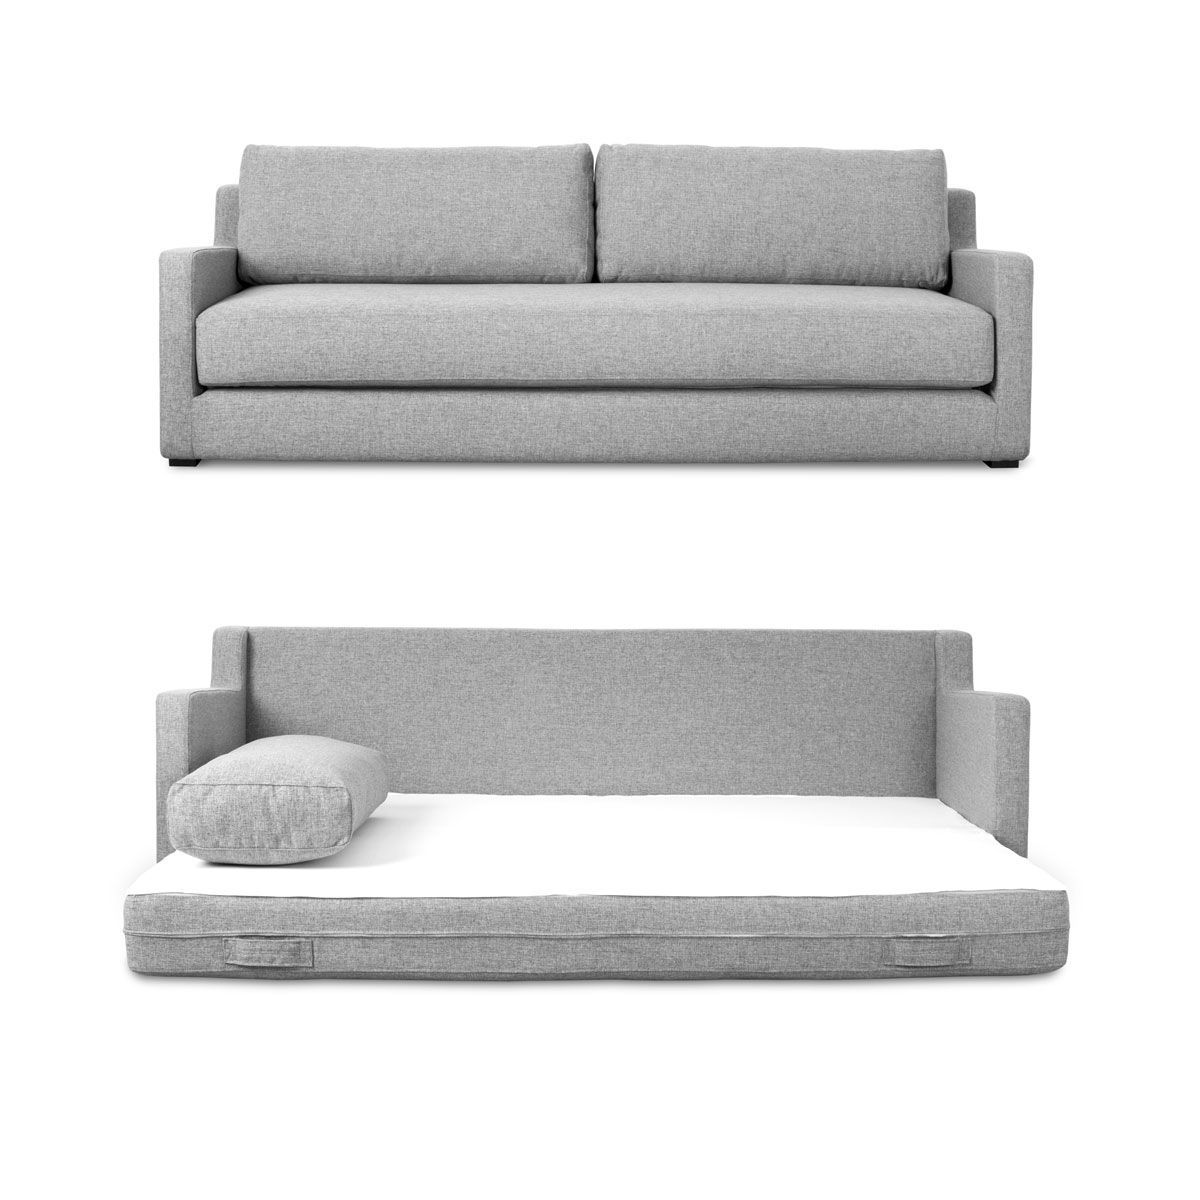 Queen Size Convertible Sofa Bed – Ideas On Foter With Regard To Queen Size Convertible Sofa Beds (View 5 of 20)